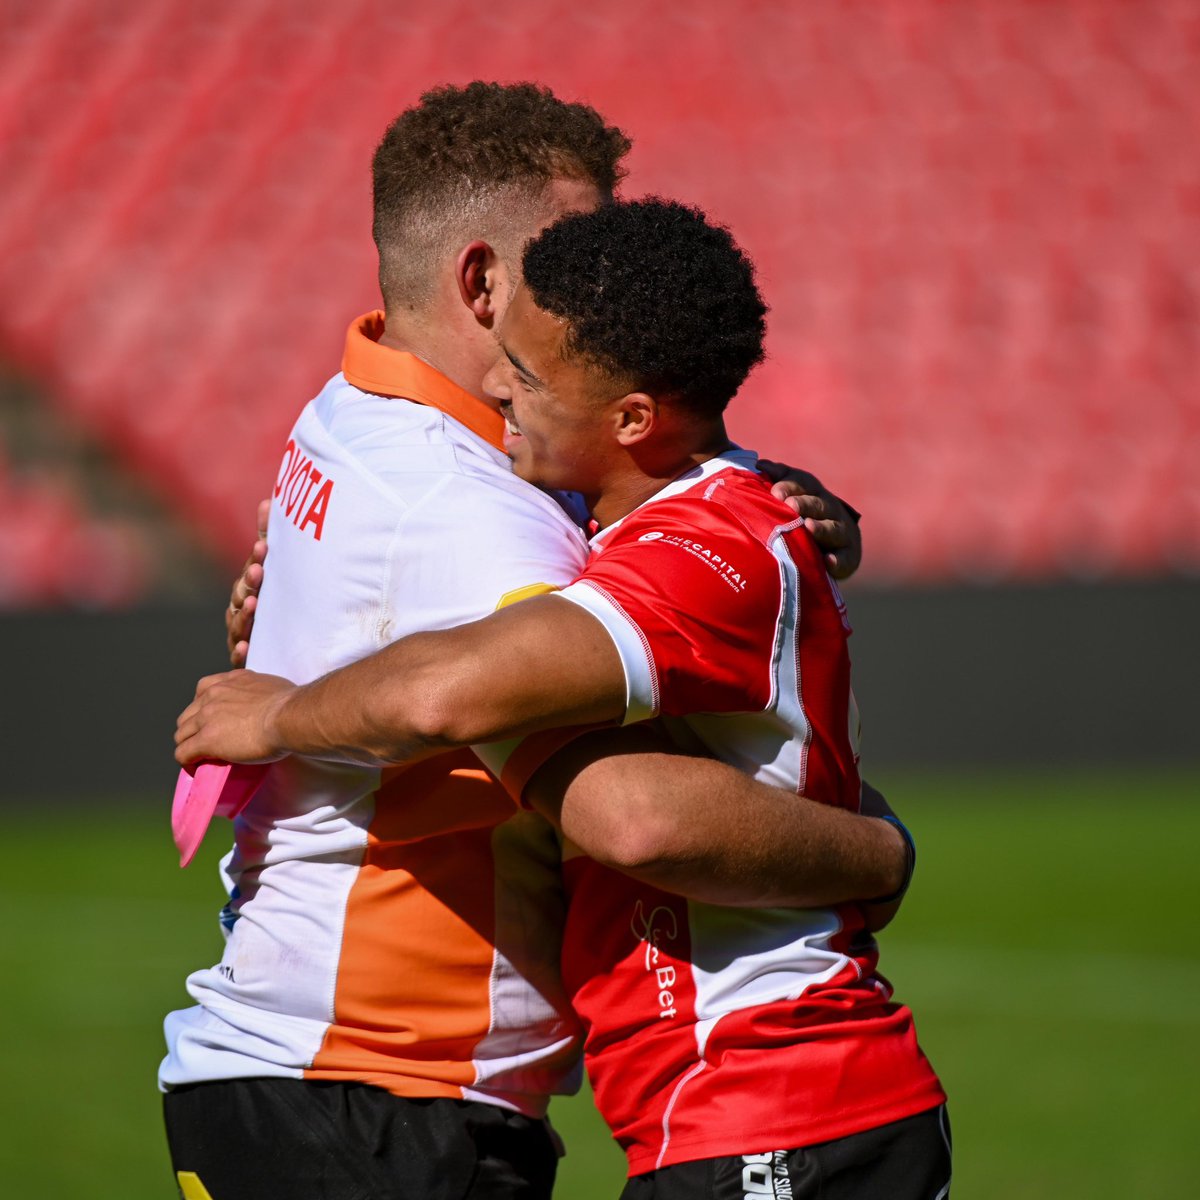 What an EPIC game of rugby! Massive shoutout to the #LionsPride who brought the energy to the Park today! 🏉✨ Safe travels back home to all our competitors, @cheetahsrugby! Until next time. #LionsPride🦁